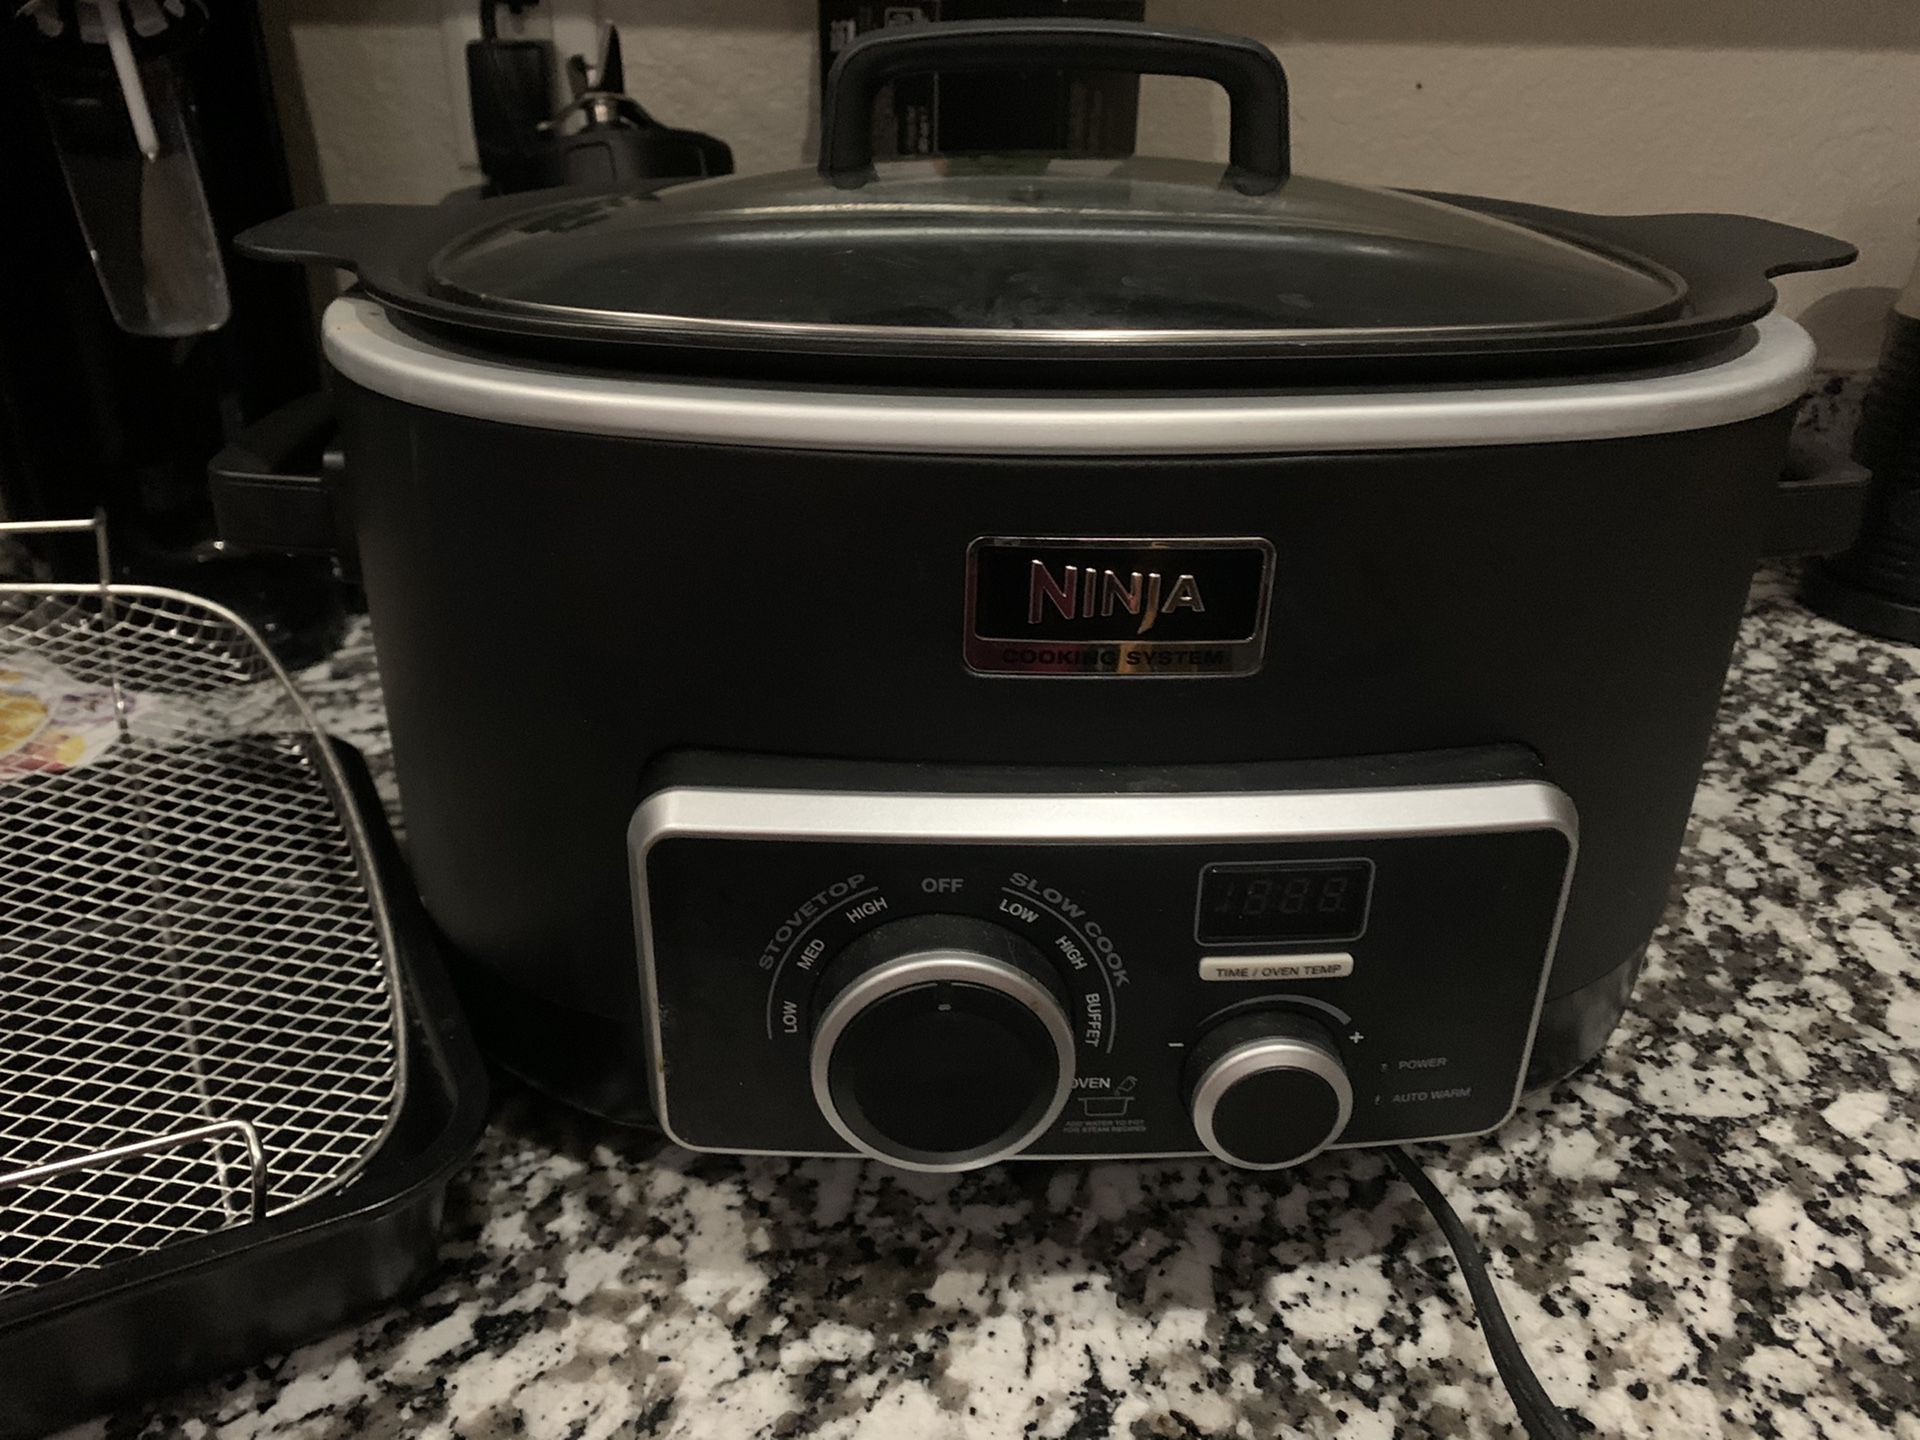 Ninja 3 in 1 cooking system